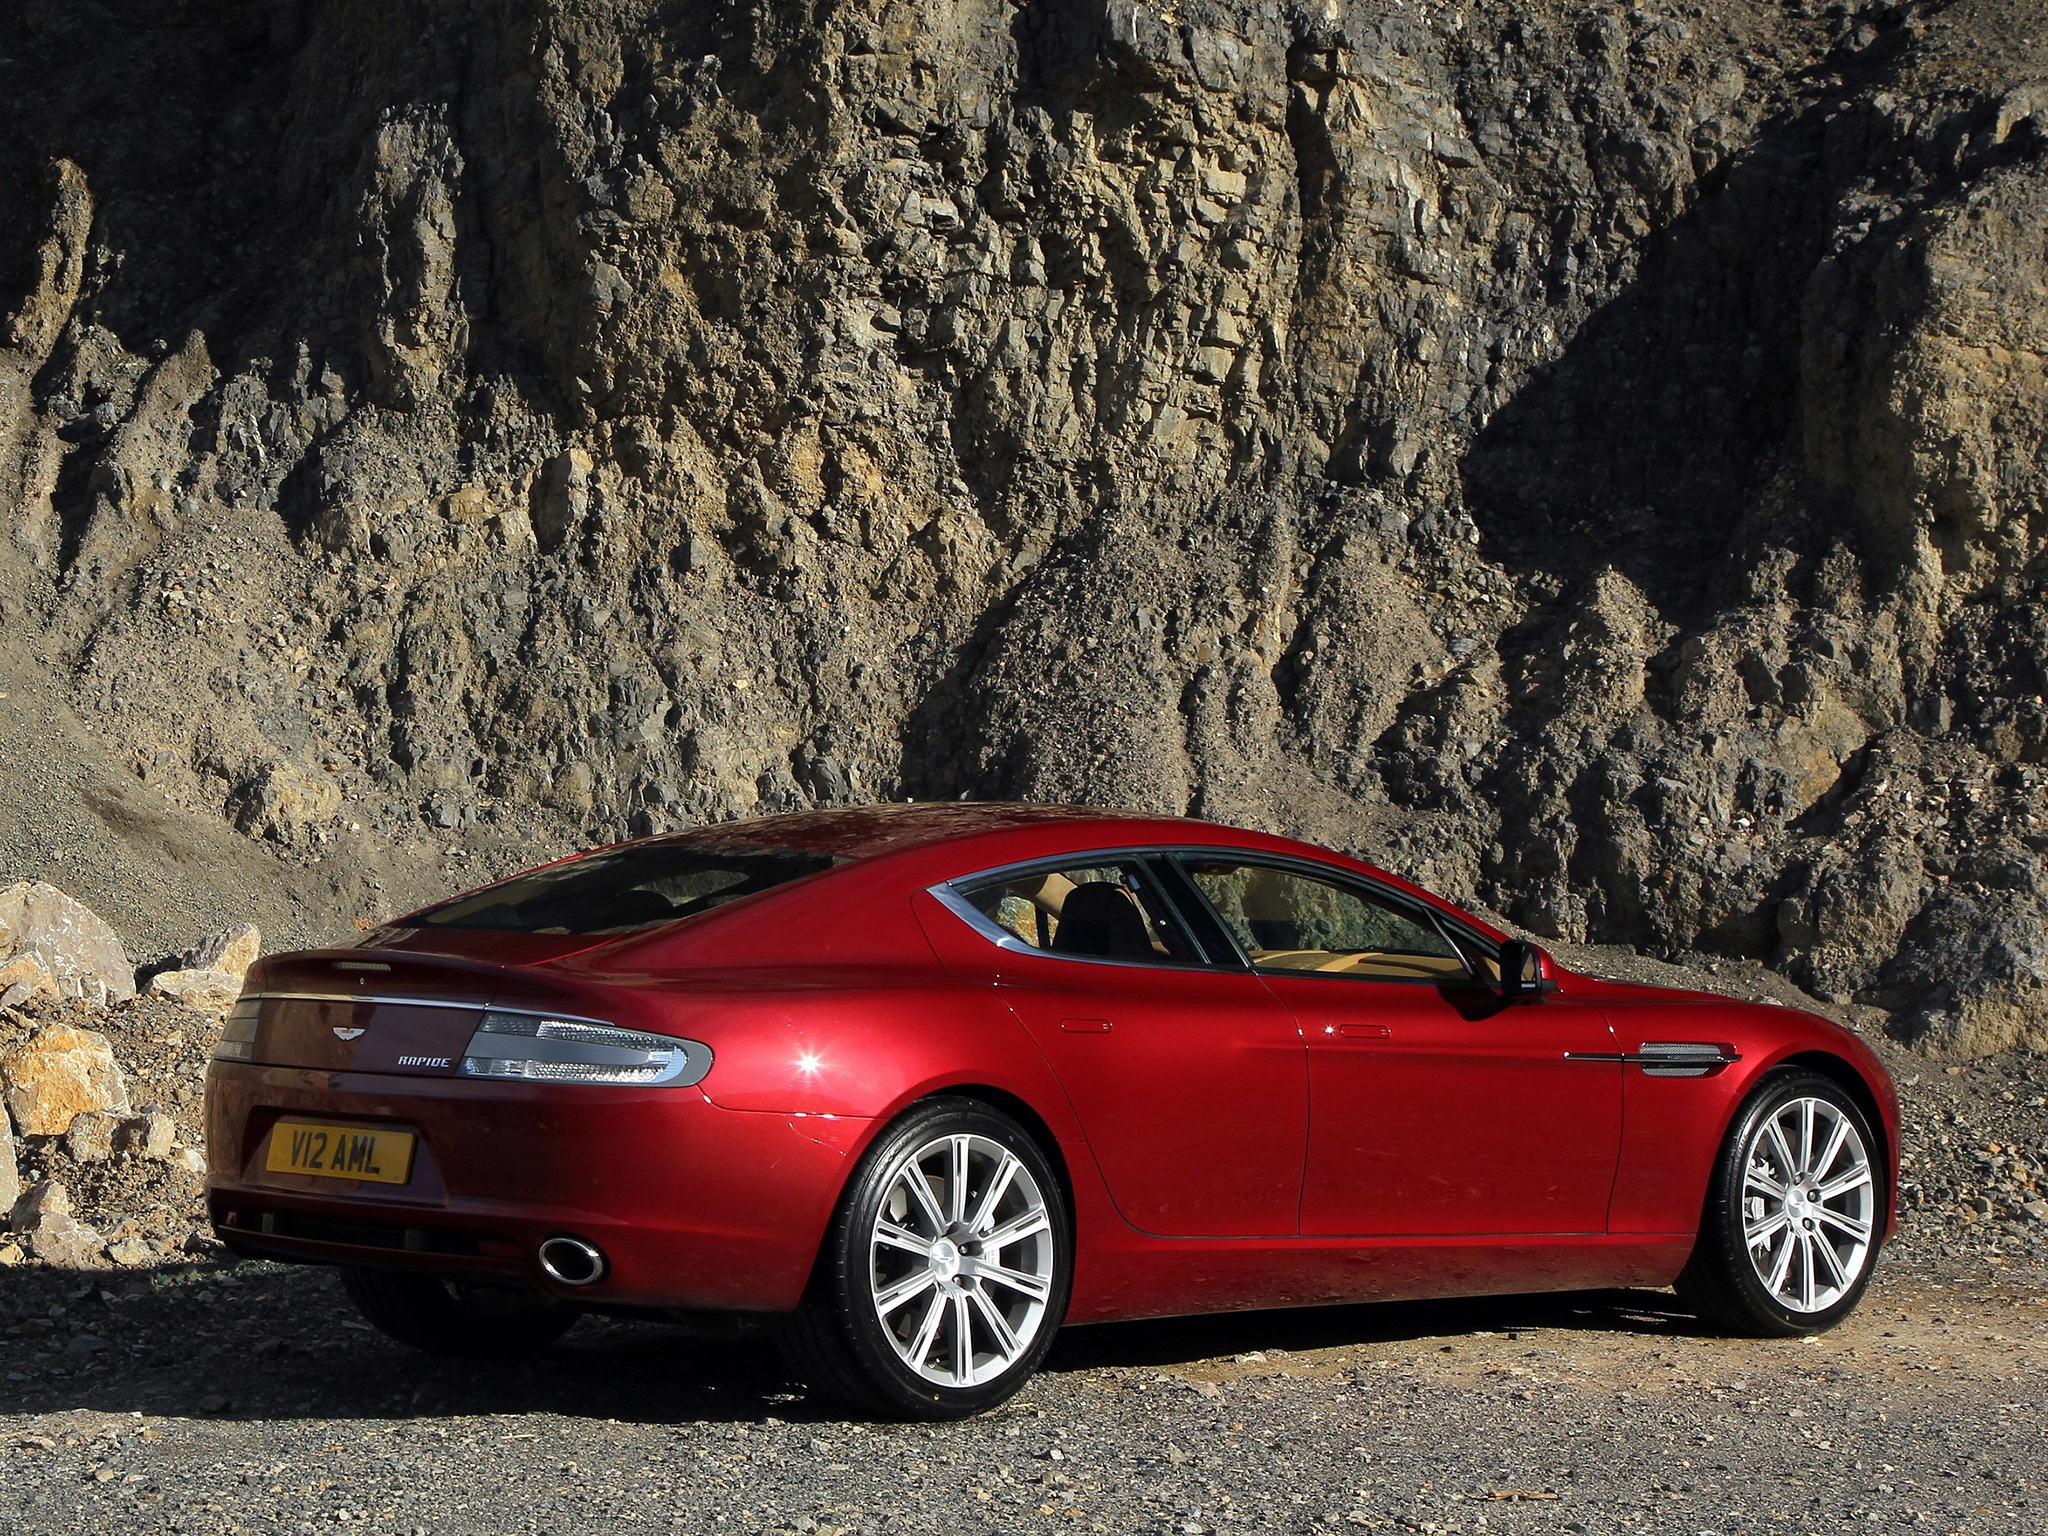 aston martin, cars, red, rock, side view, 2009, rapide